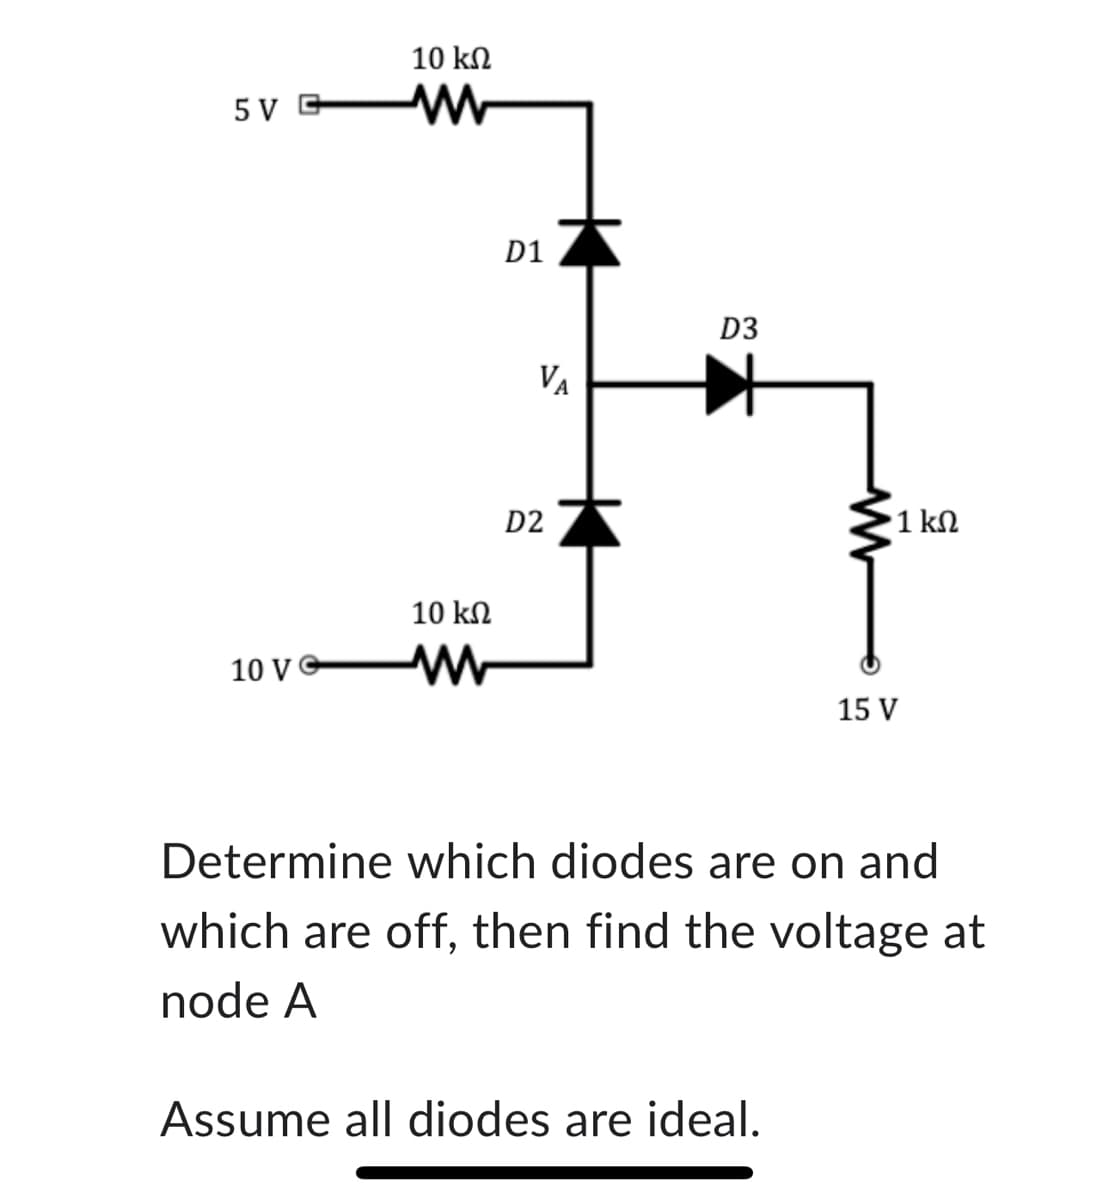 5 V G
10 VC
10 ΚΩ
10 ΚΩ
www
D1
VA
D2
D3
www
Assume all diodes are ideal.
•1 ΚΩ
15 V
Determine which diodes are on and
which are off, then find the voltage at
node A